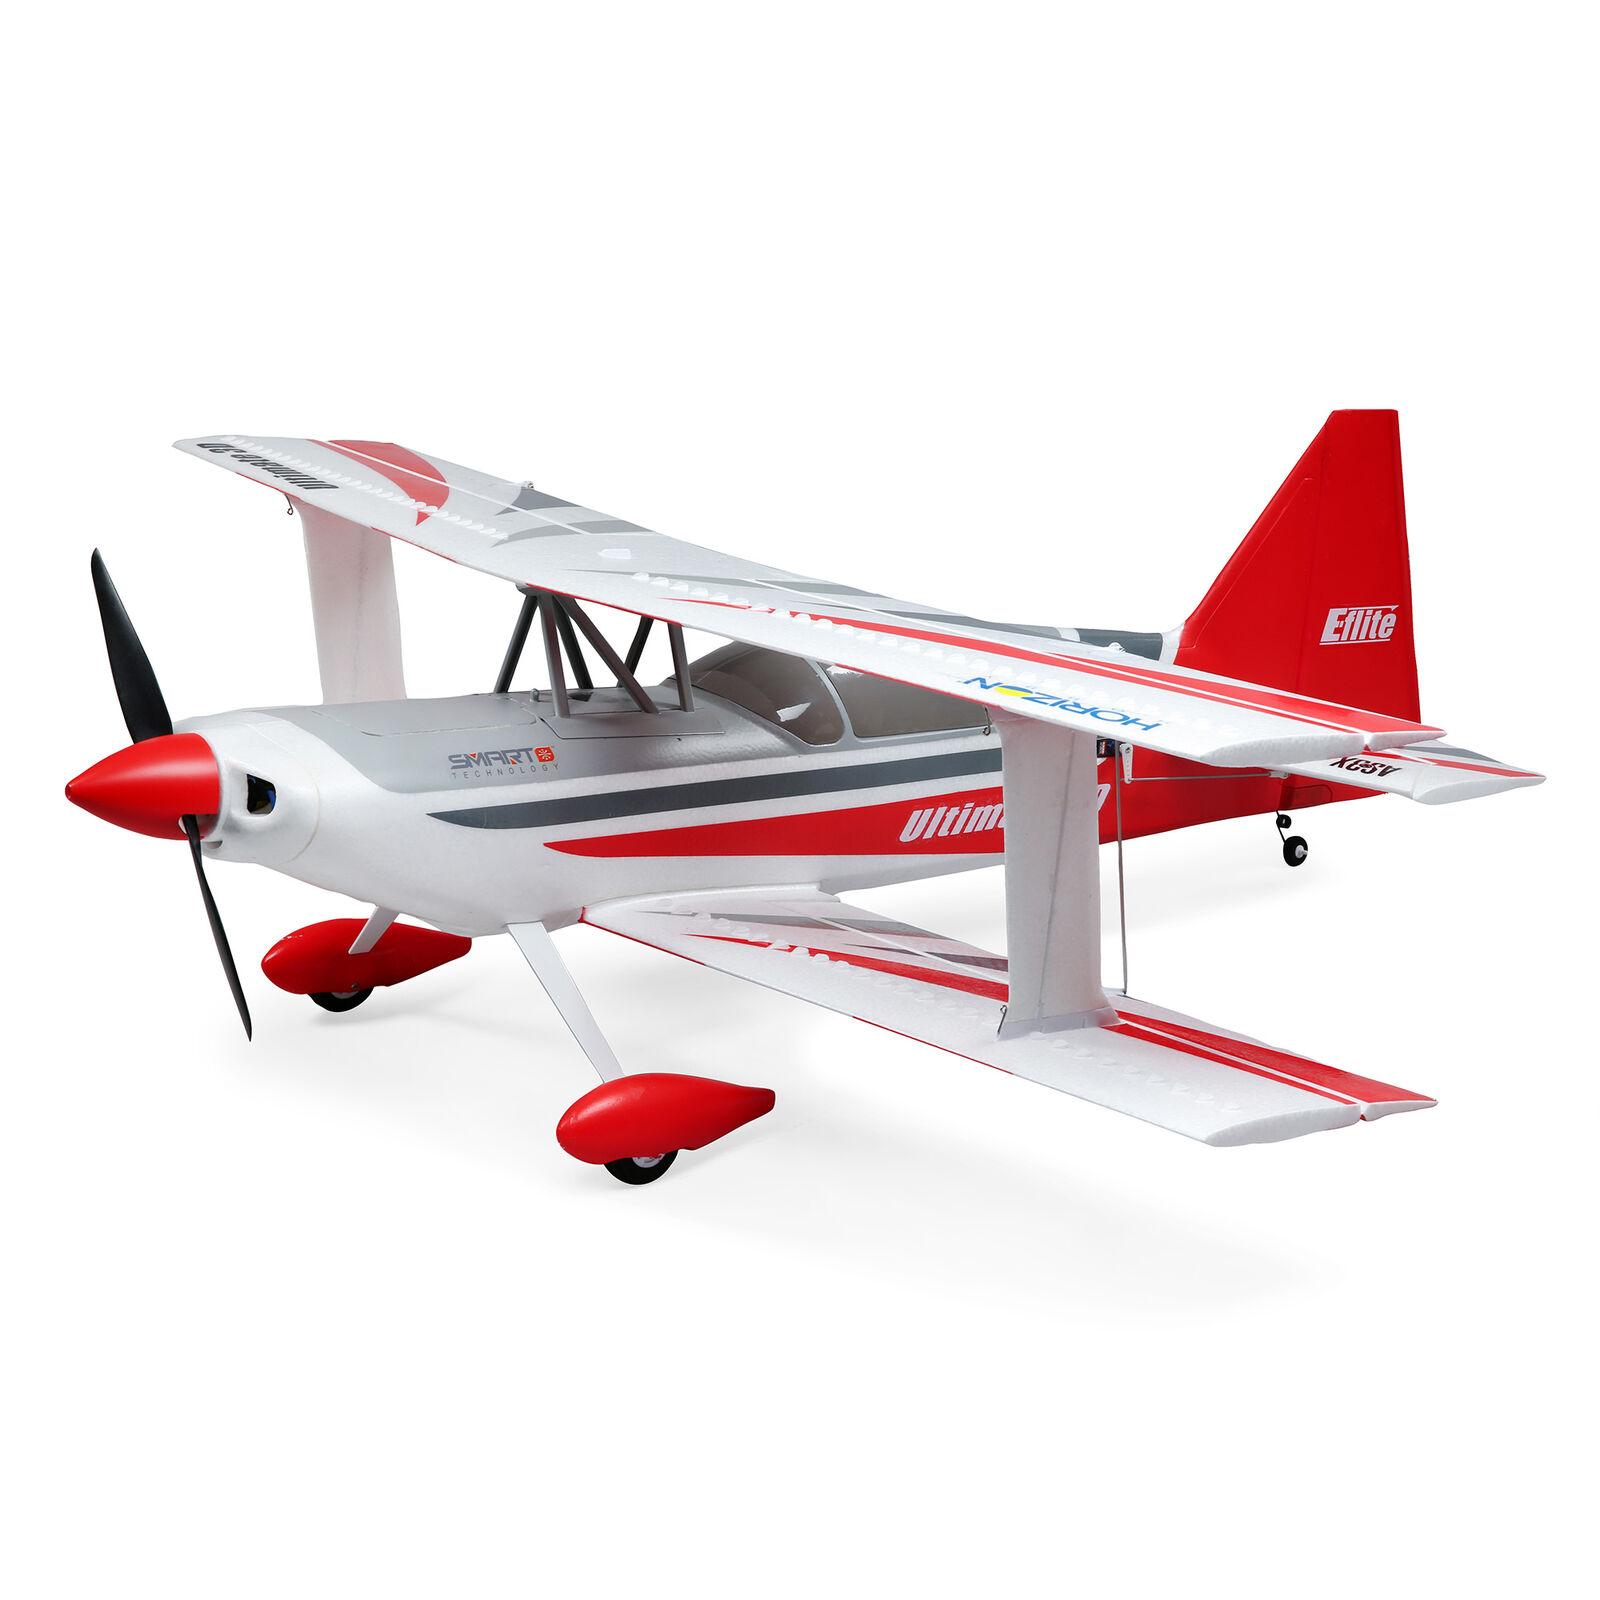 3D Rc Plane Kits: Benefits of Building 3D RC Plane Kits: Satisfaction, Learning Experience, Cost-effectiveness